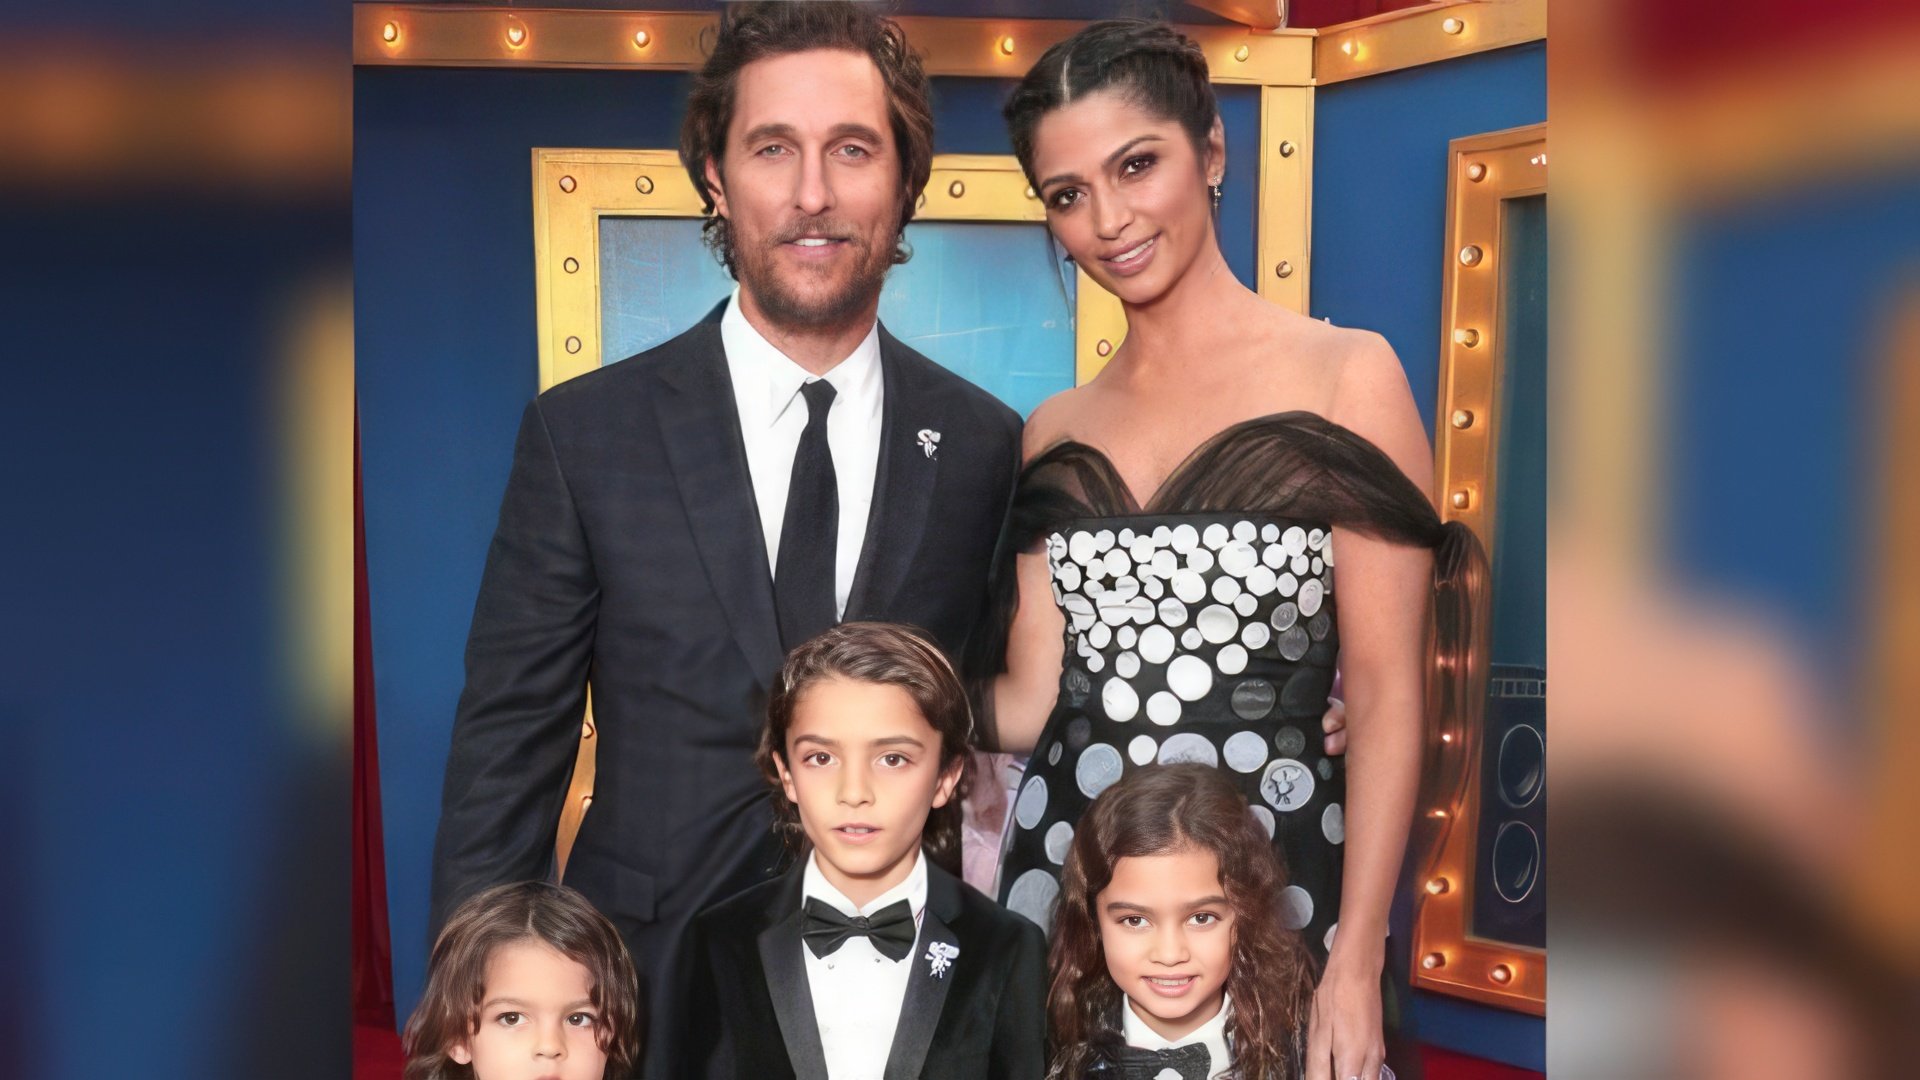 The happy family: McConaughey with his wife and children